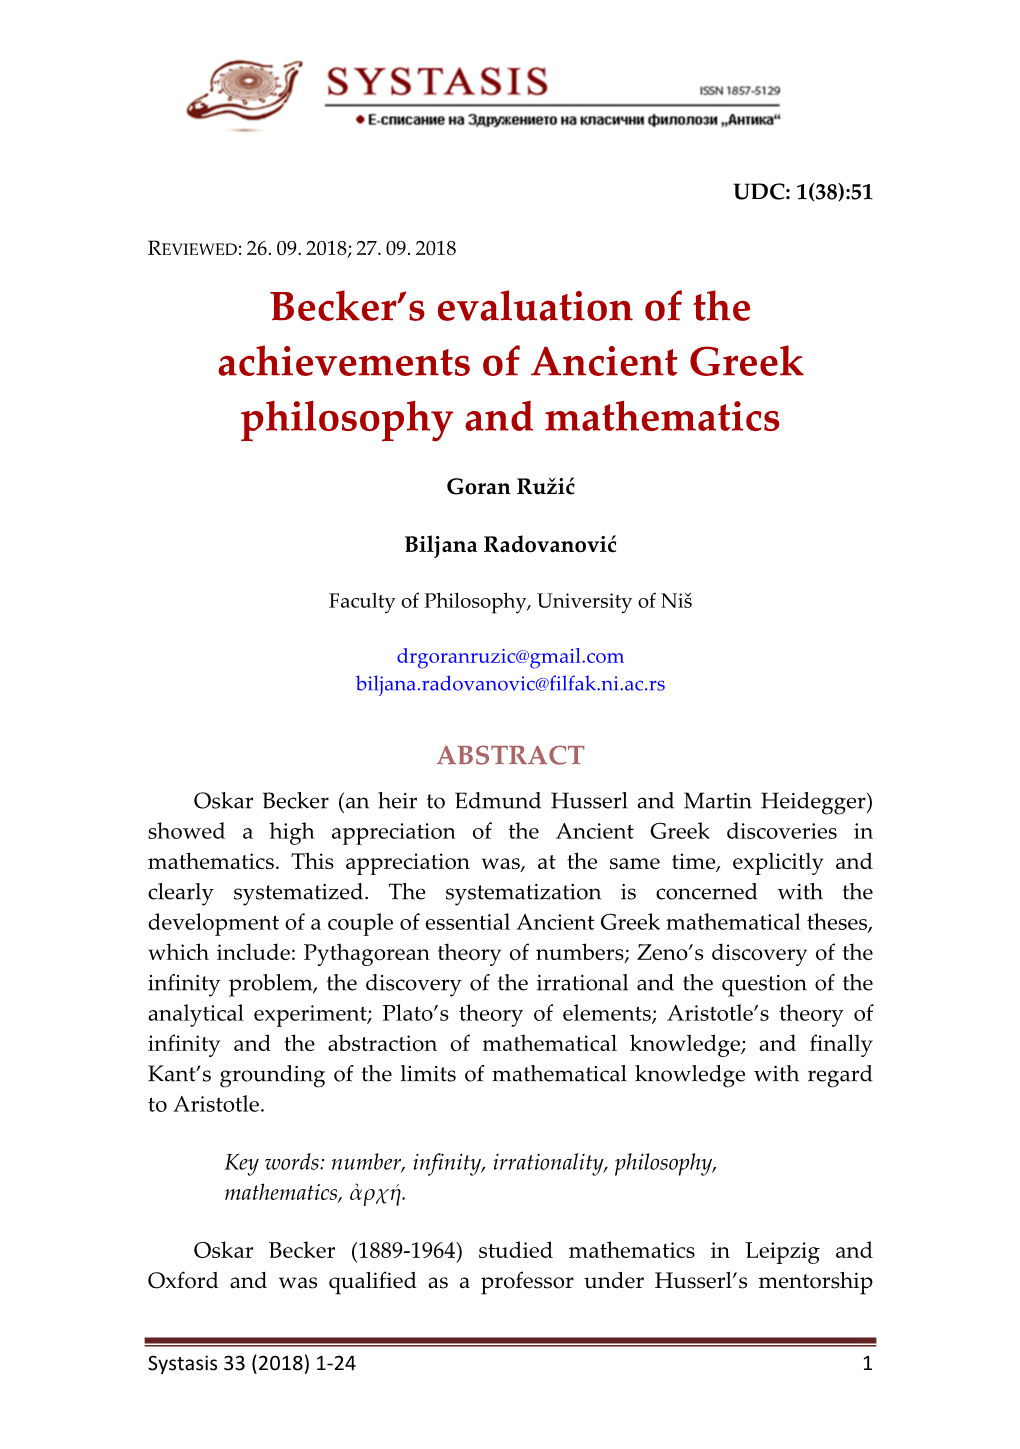 Becker's Evaluation of the Achievements of Ancient Greek